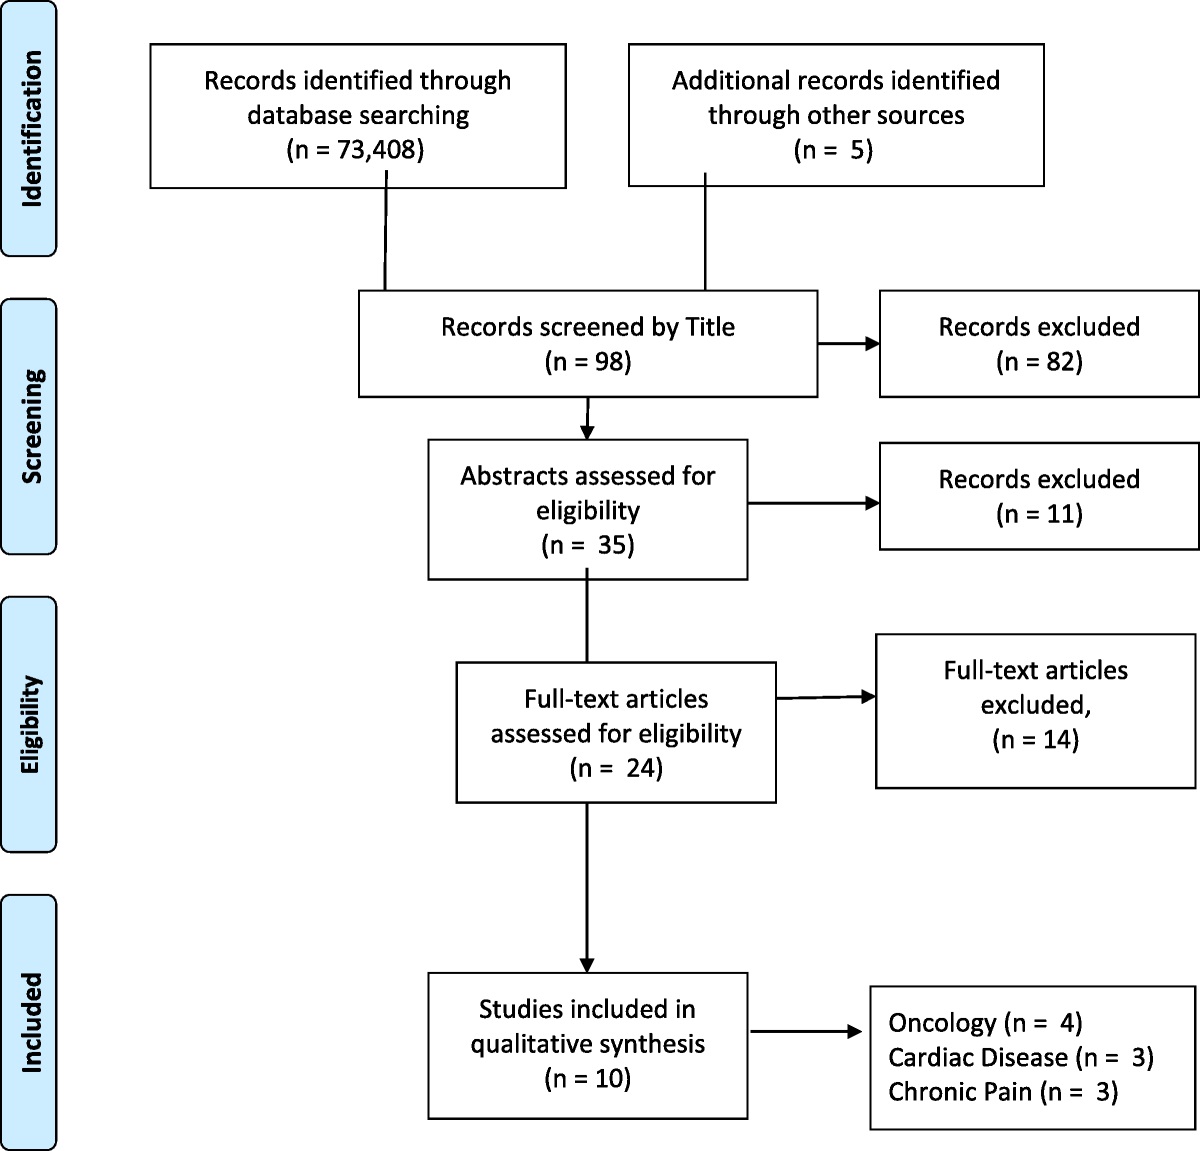 The Impact of Mindfulness-Based Interventions on Objective Physiological Measures of Autonomic Function for Individuals With Medical Conditions: A Review of the Evidence